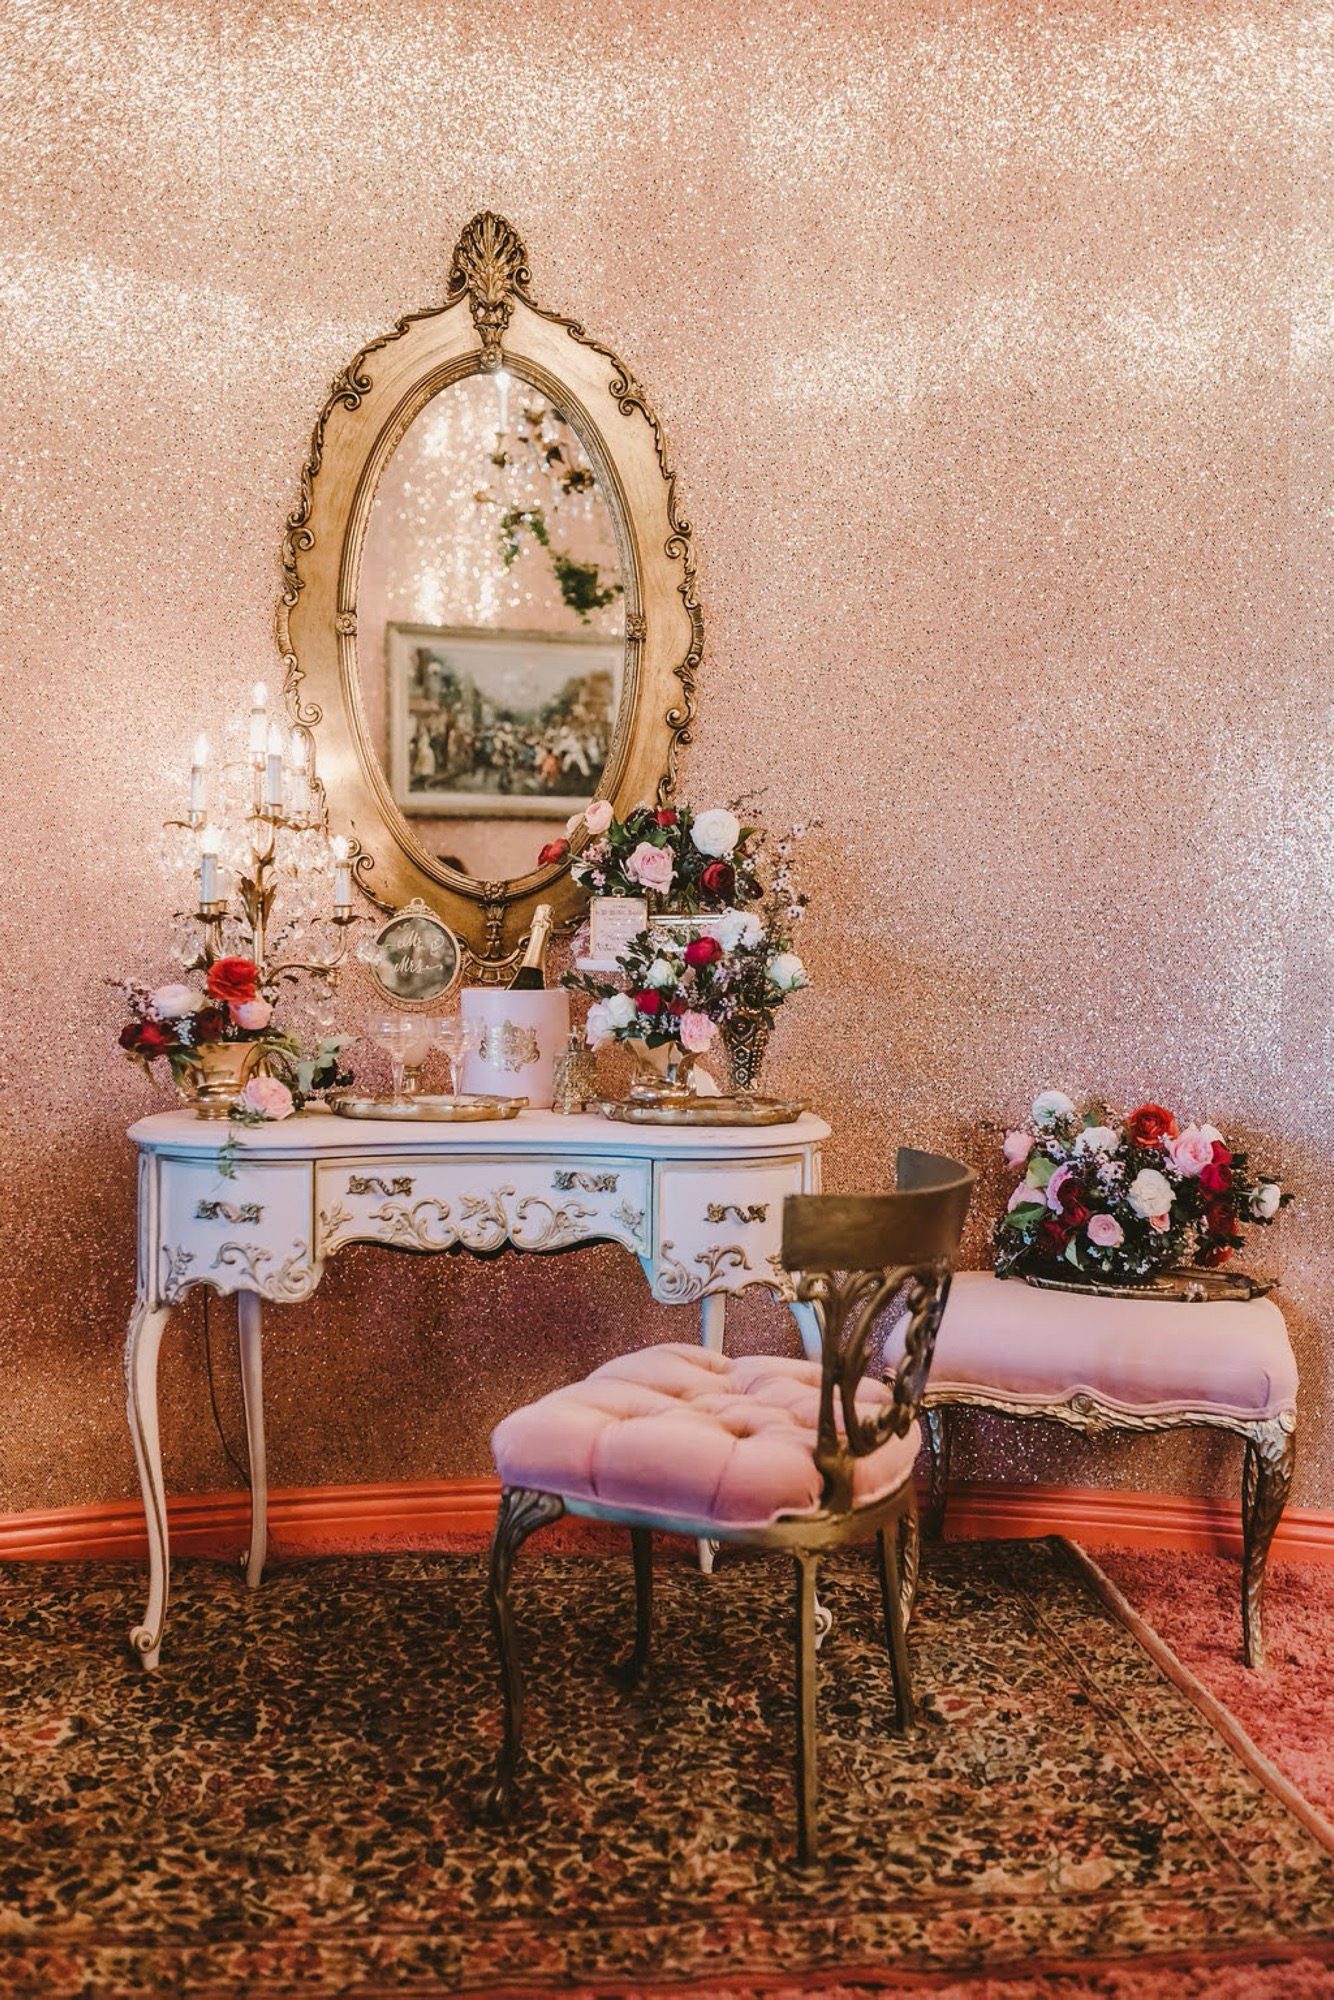 Vintage glamour station inspired by Marie Antoinette